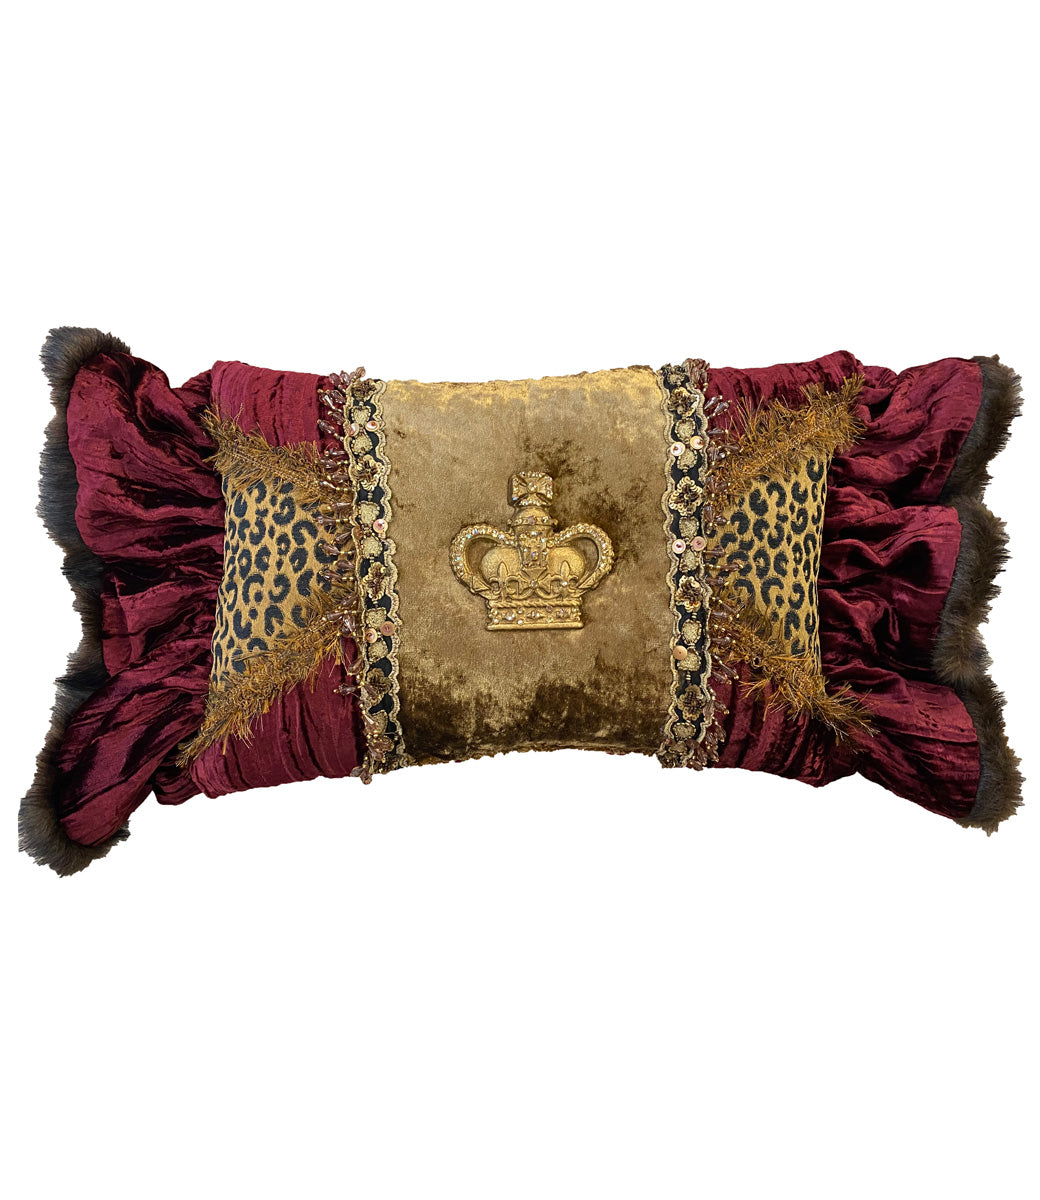 Burgundy and Gold Velvet Rectangle Ruffled Pillow with Jeweled Crown